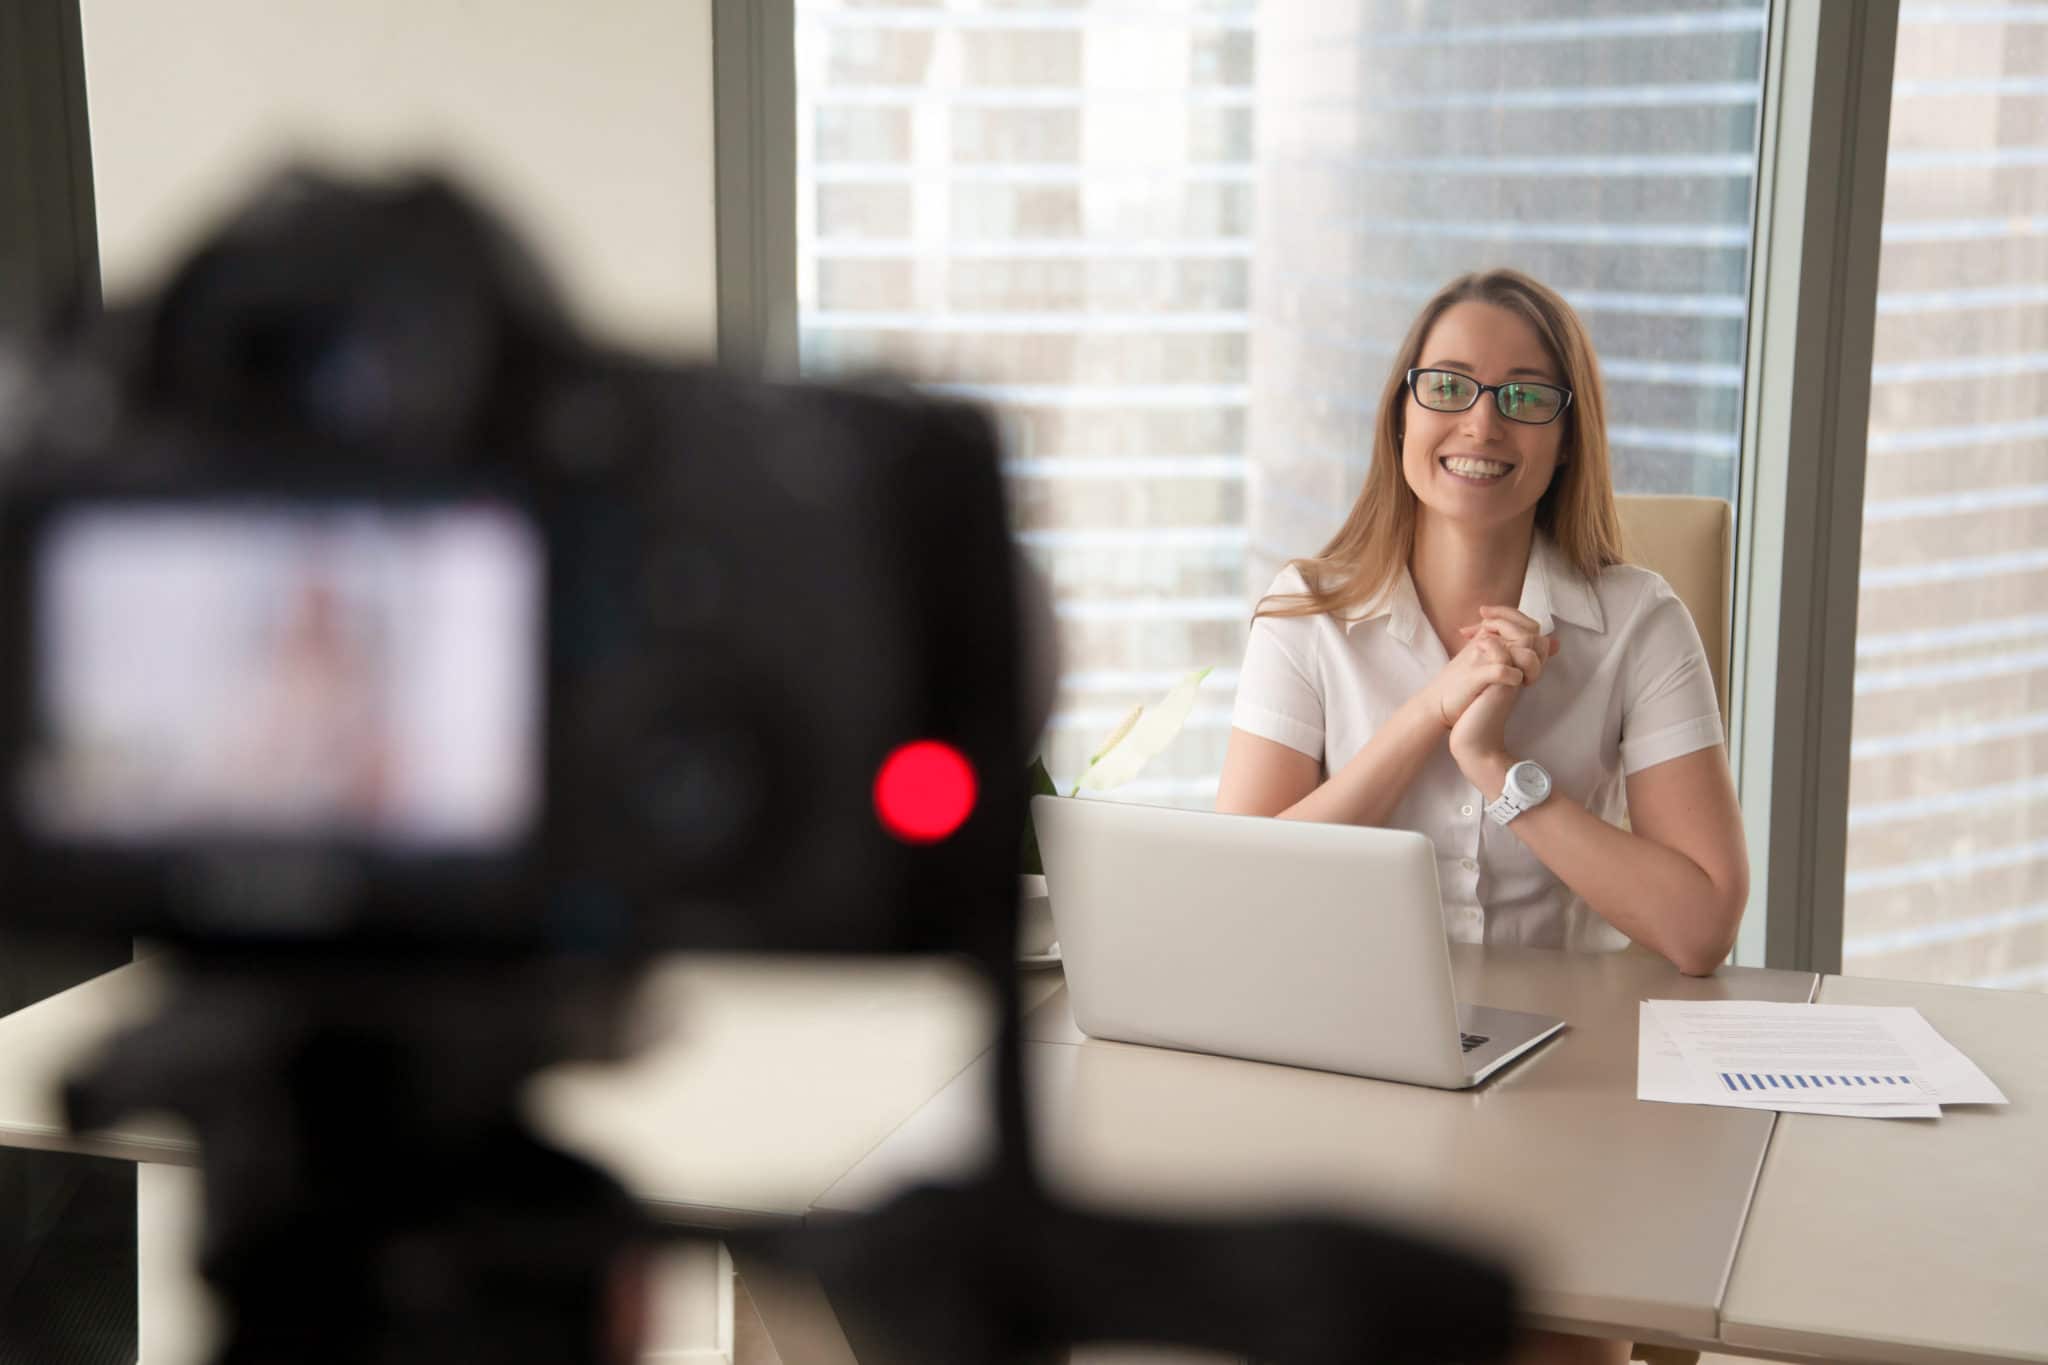 Female customer smiling at desk while video of her presentation being recorded